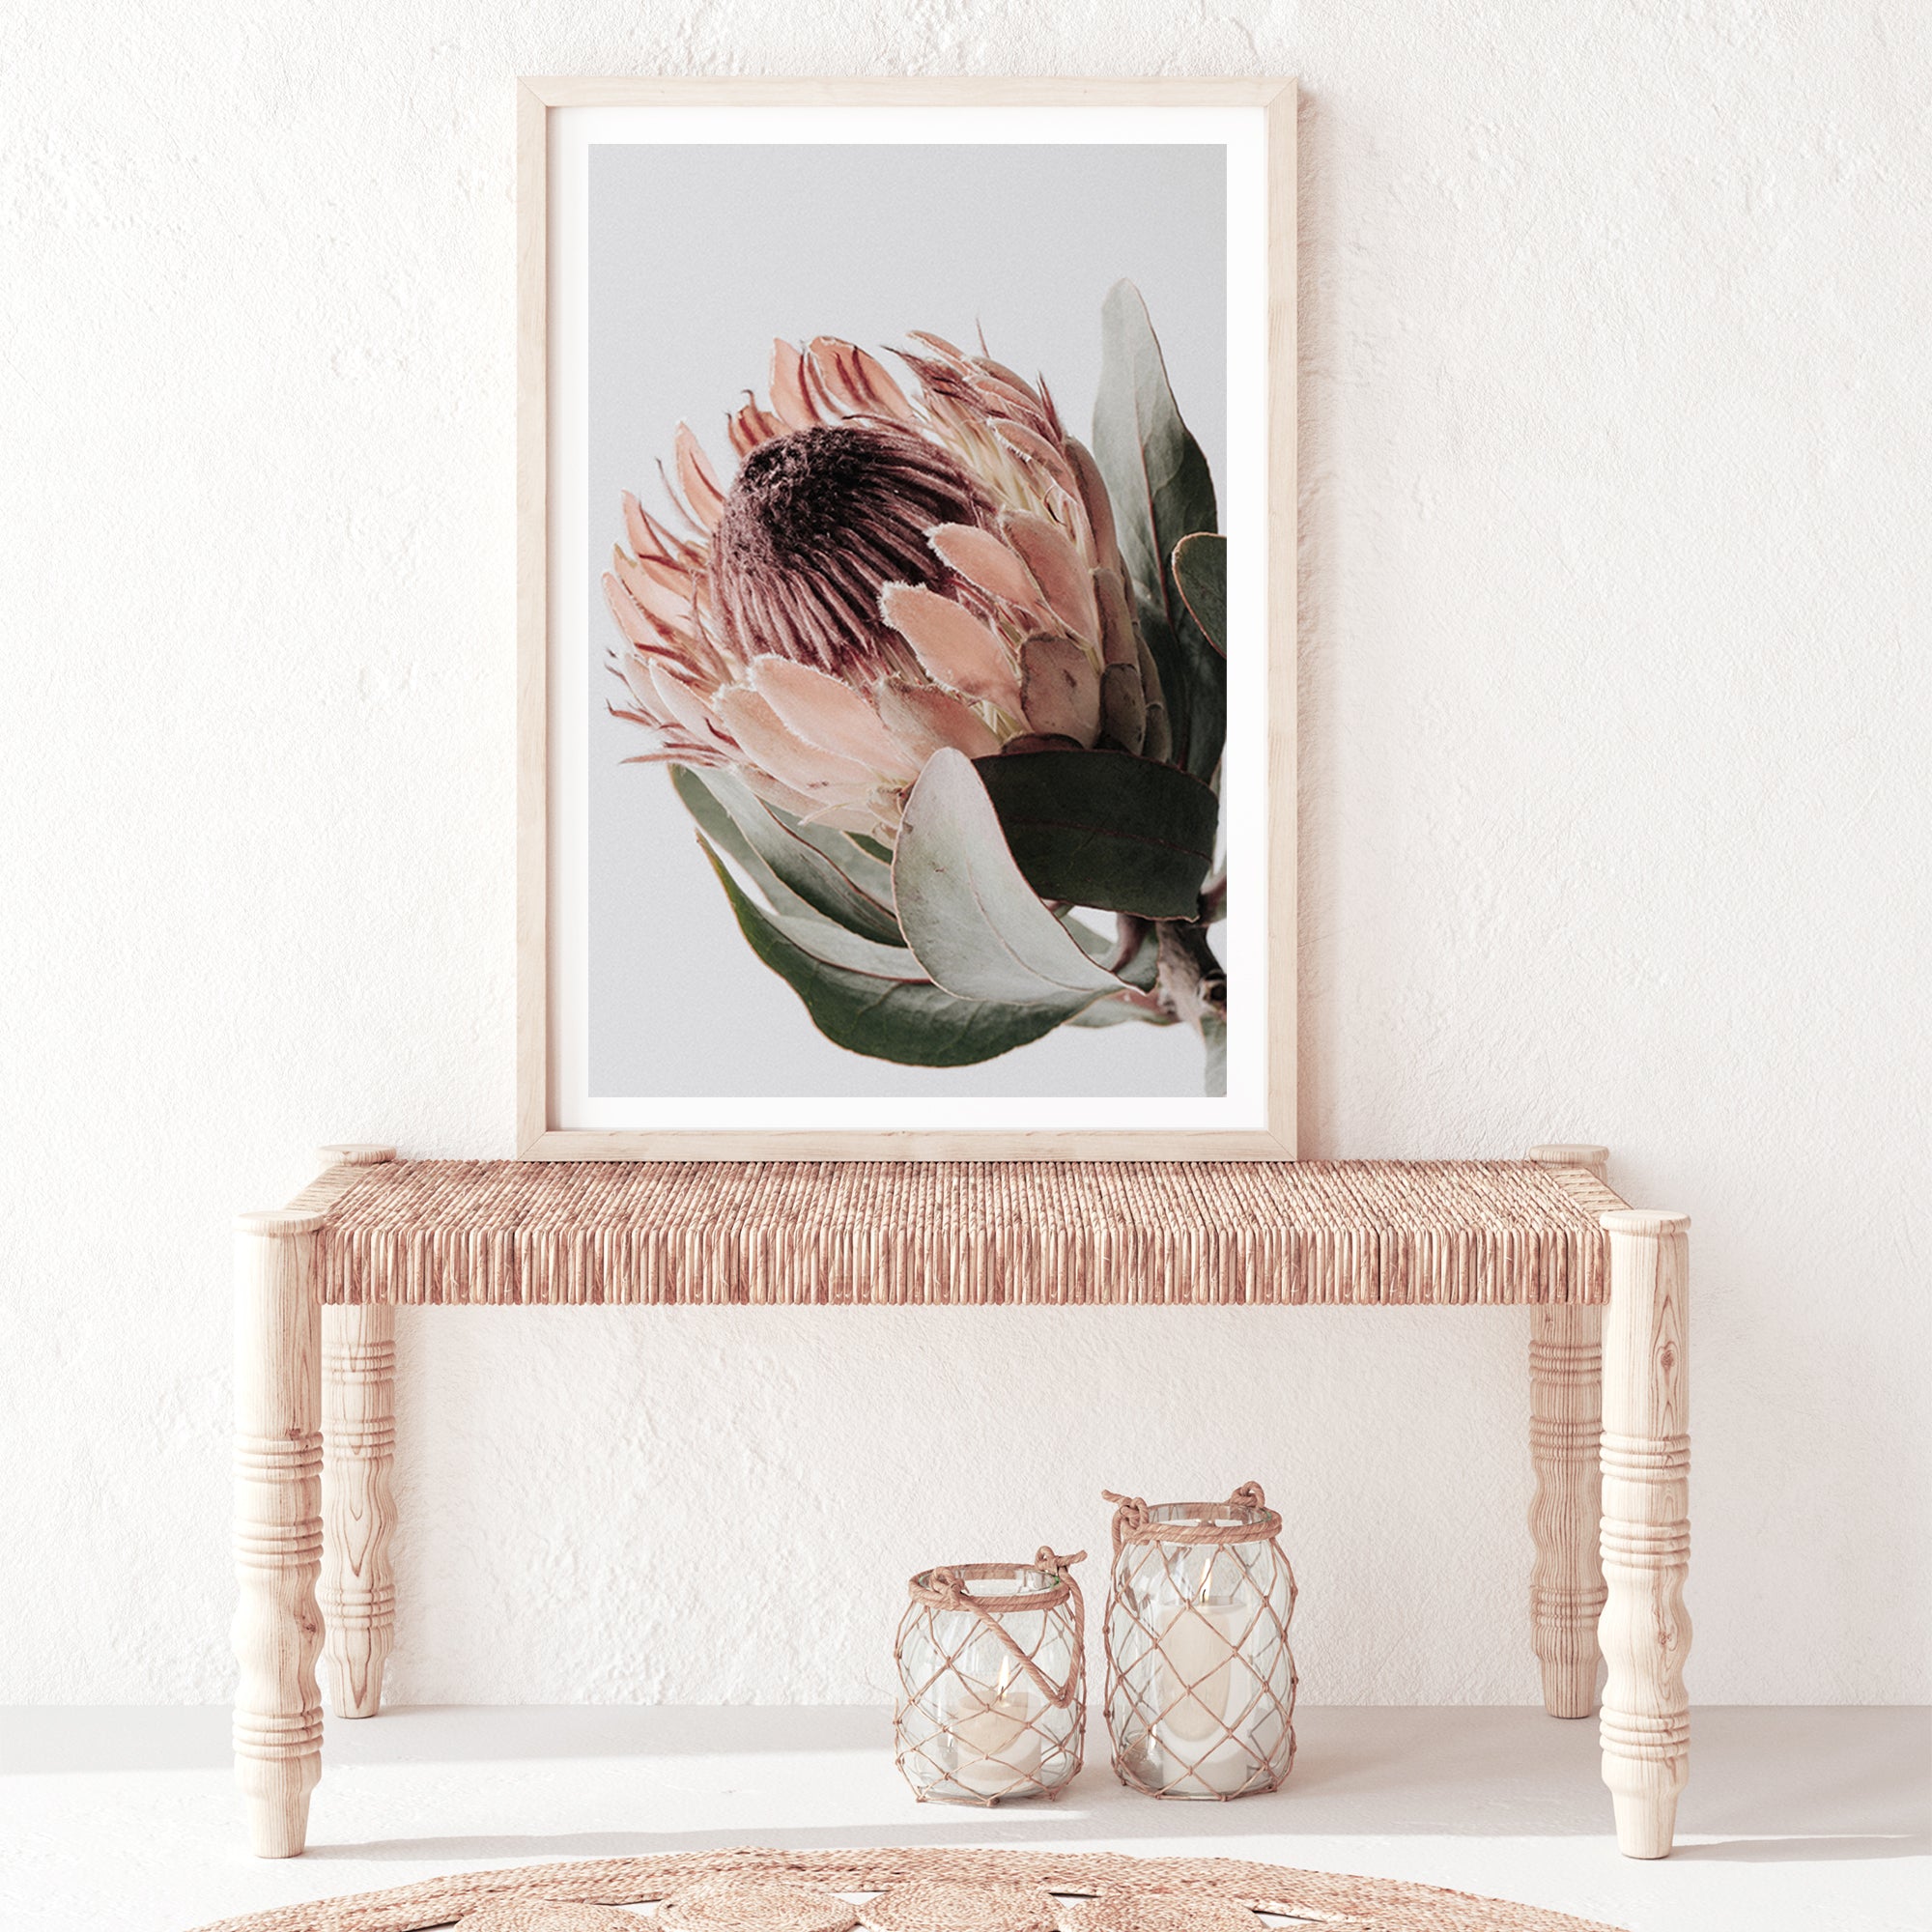 An artwork featuring a beautiful peach protea flower with green leaves in muted tones, available framed or unframed.